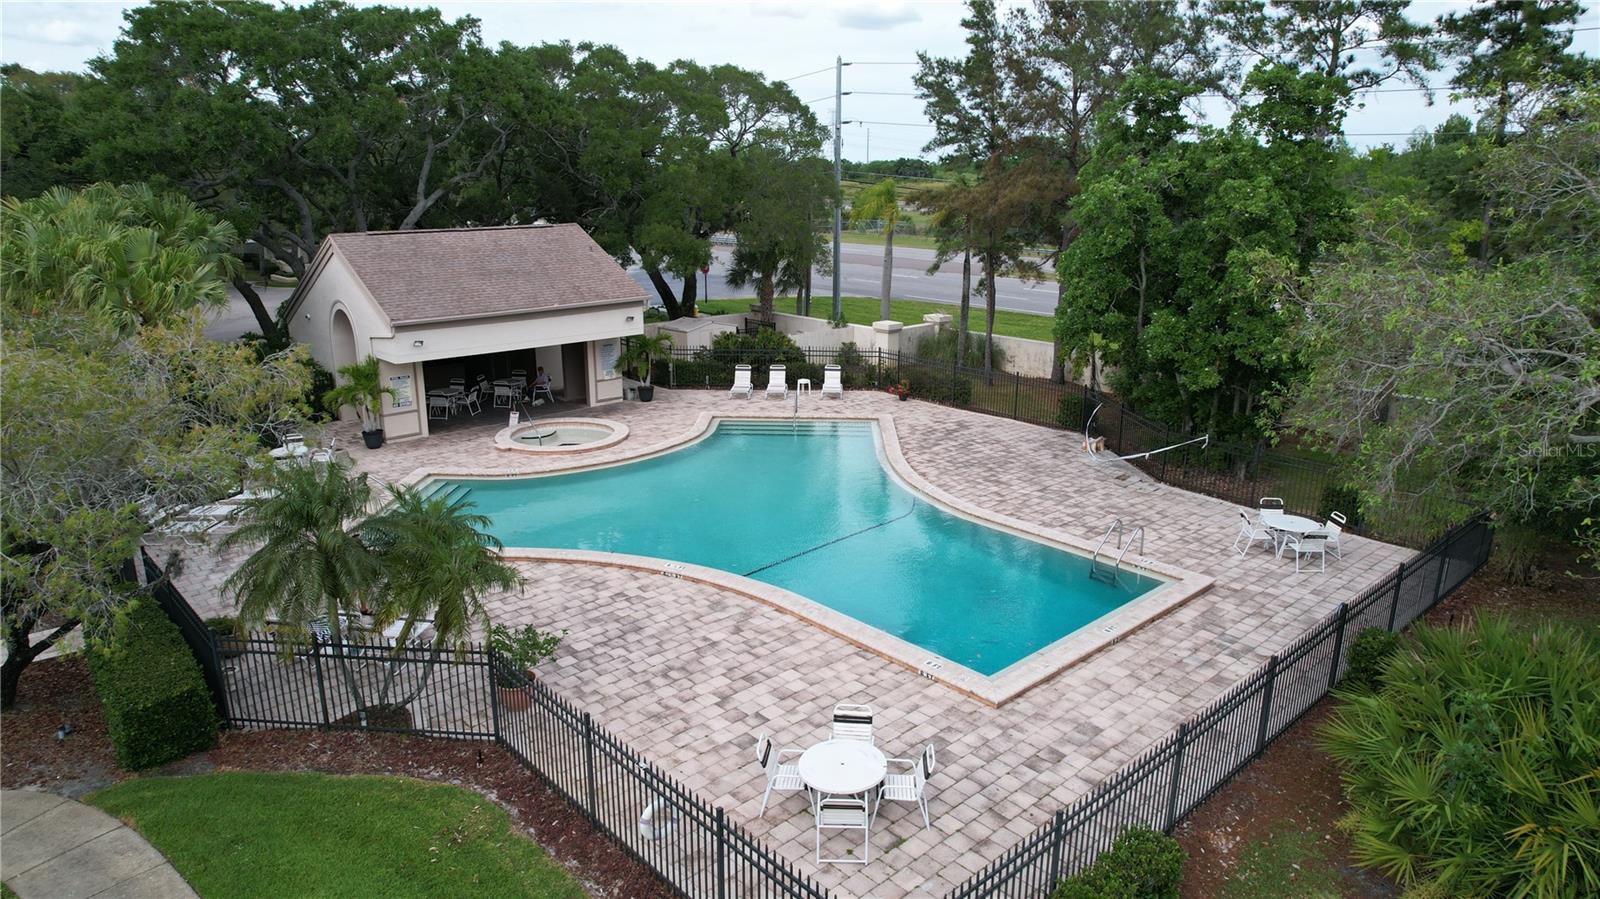 Community Pool and Clubhouse